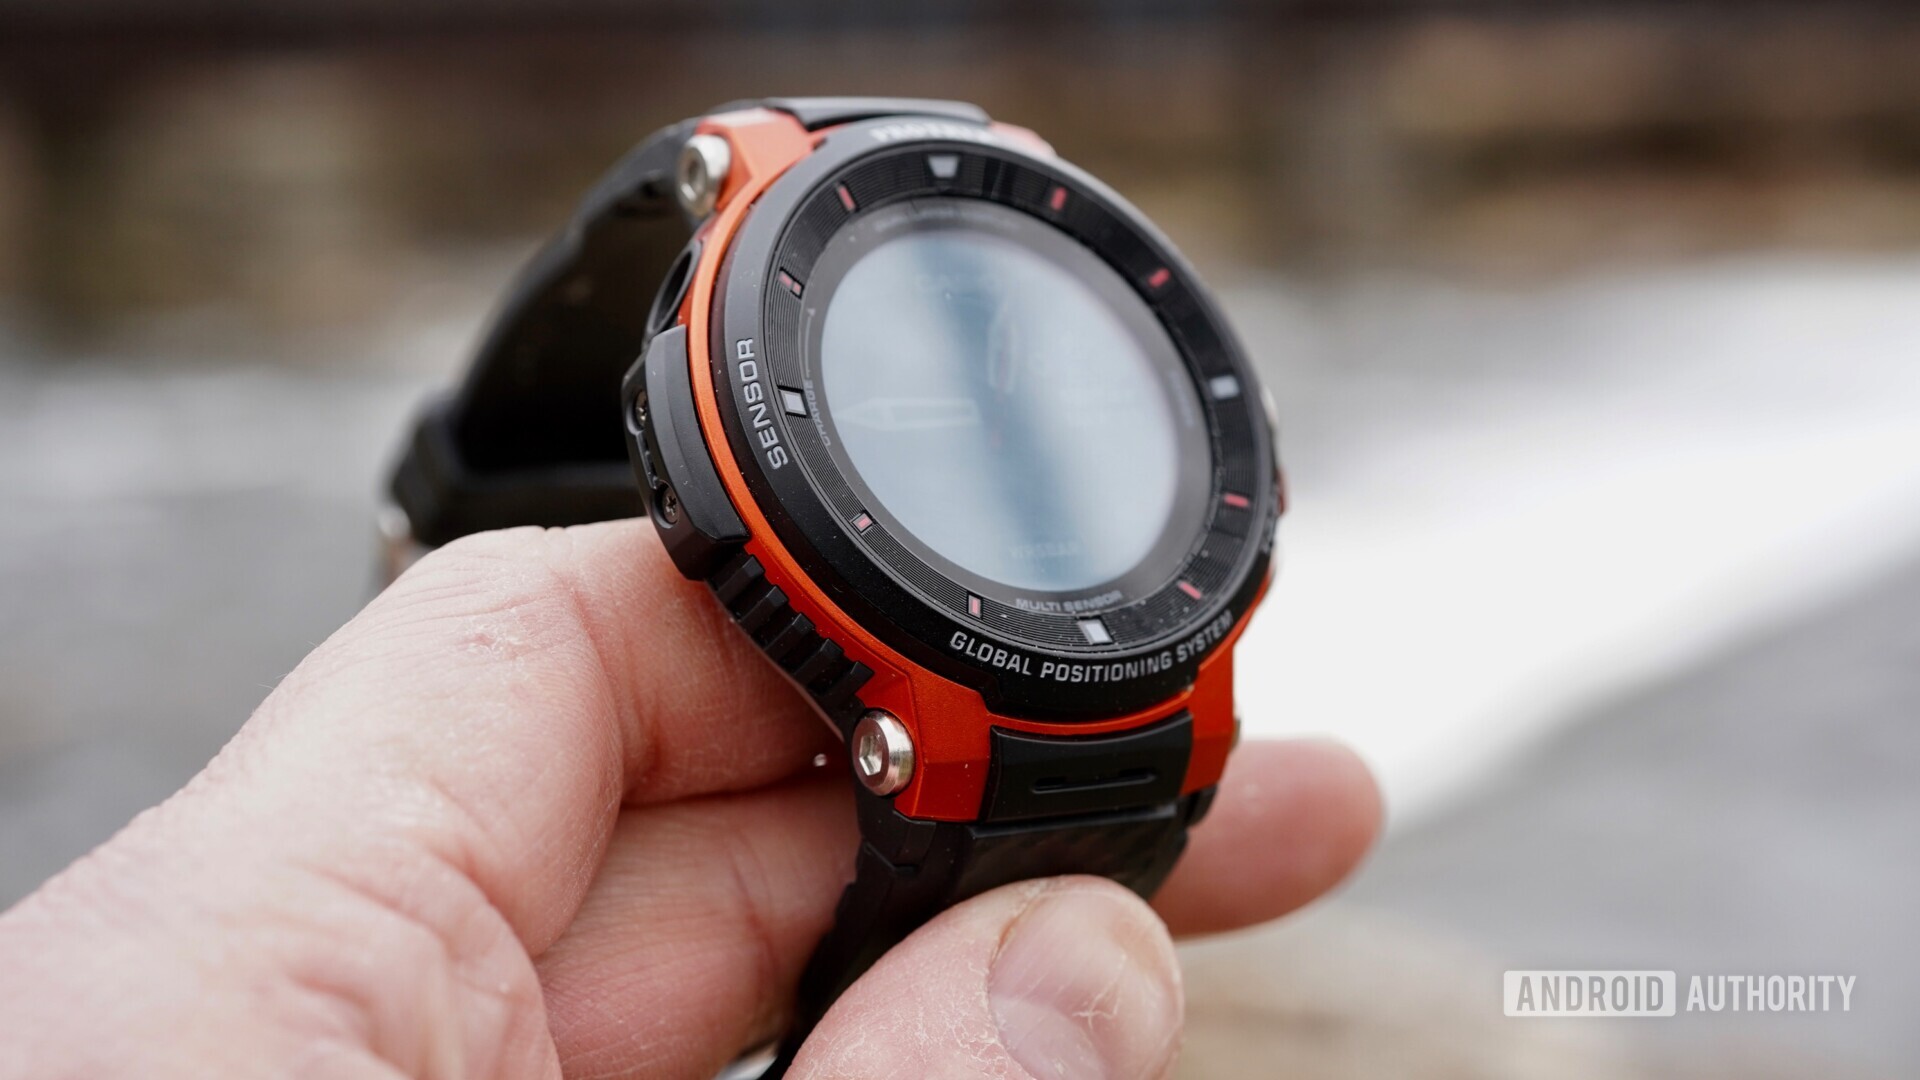 Casio Pro Trek WSD-F30 review: Tracking all your adventures